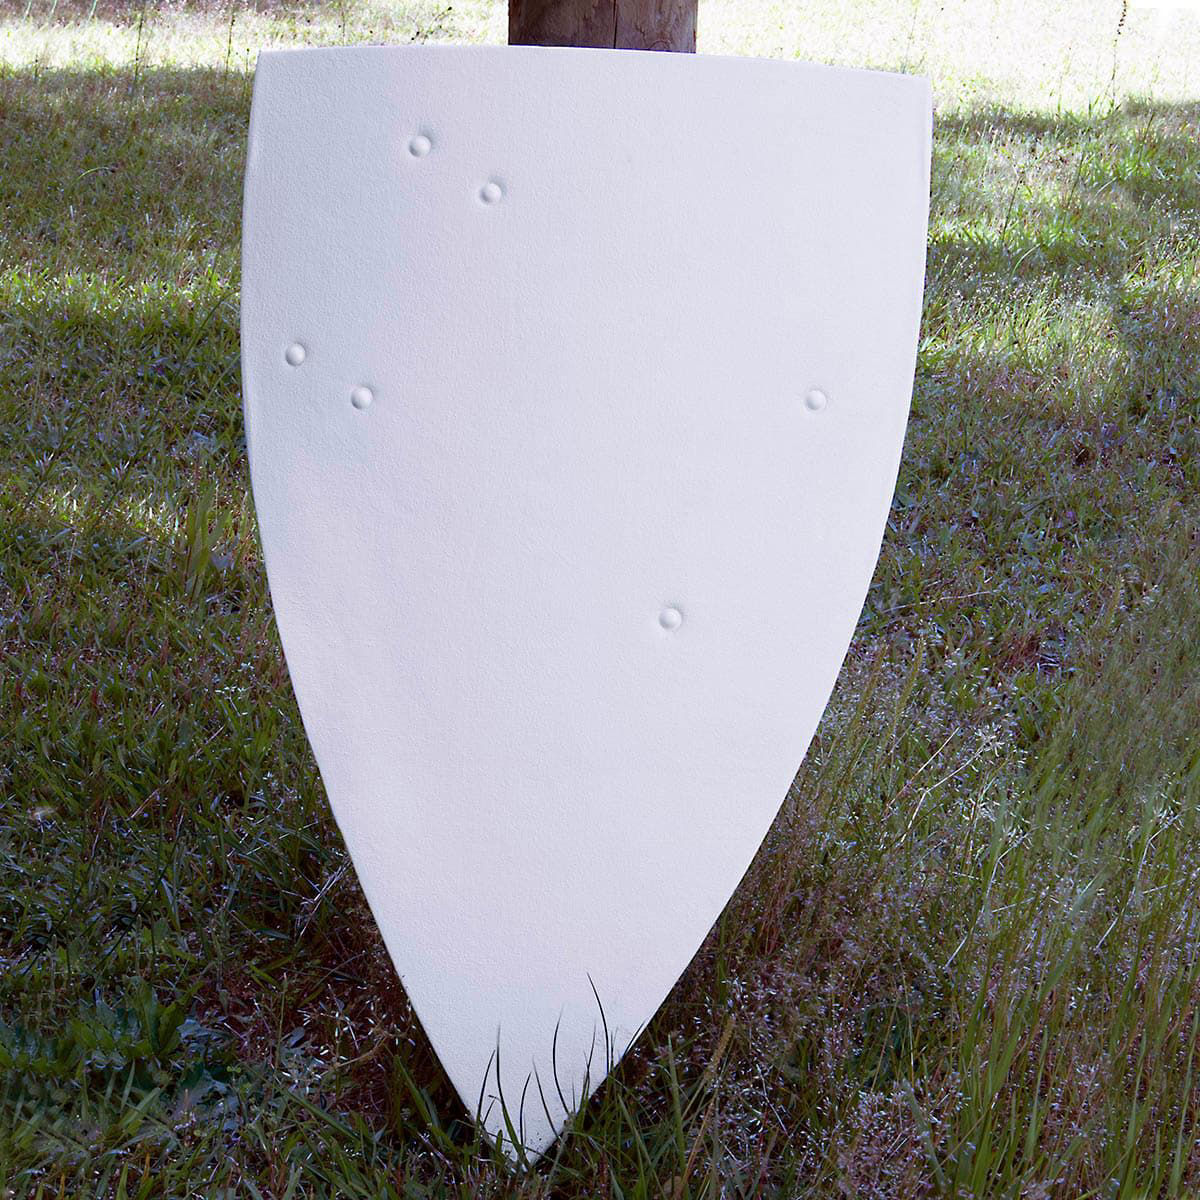 curved wood knightly shield is covered on canvas, padded and has adjustable arm straps, ready to prime and custom paint